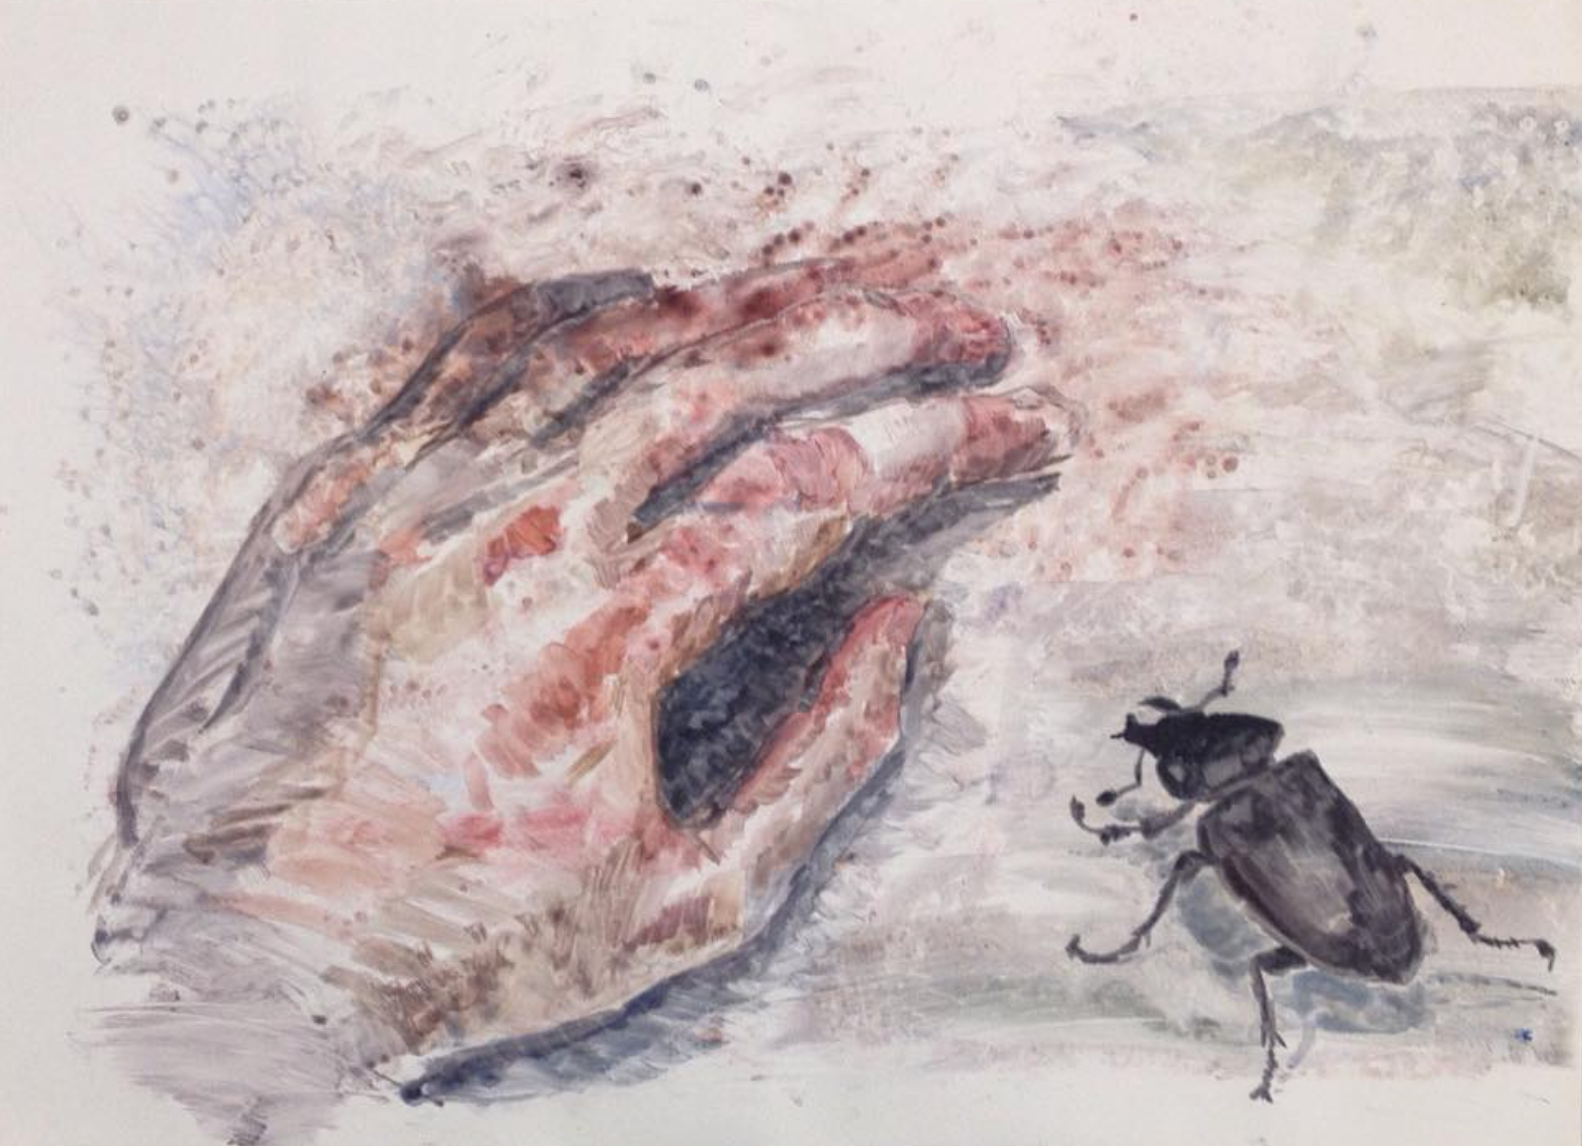 Hand and Beetle